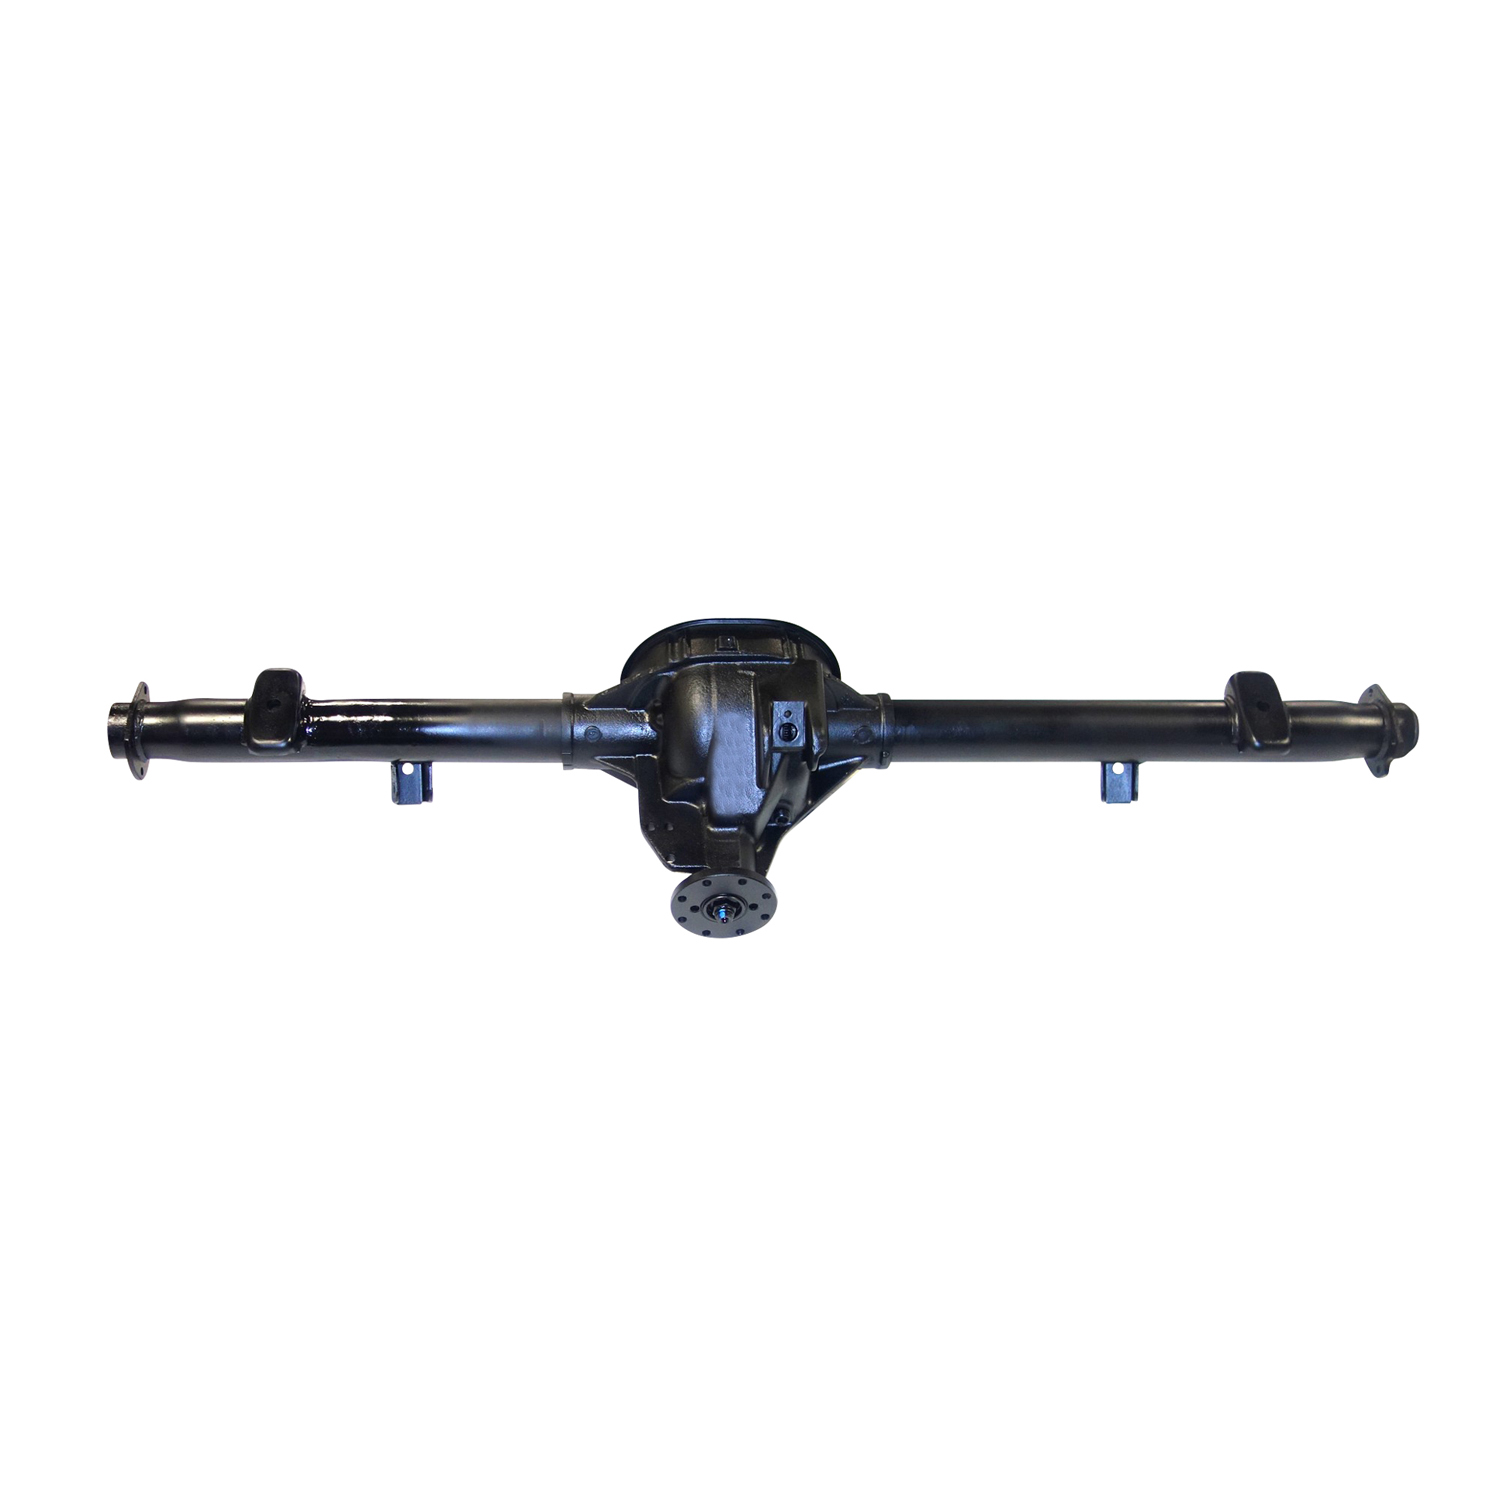 Remanufactured Axle Assy for 8.8" 2000 F150 4.11 , Rear Drum, Posi LSD *Check Tag*